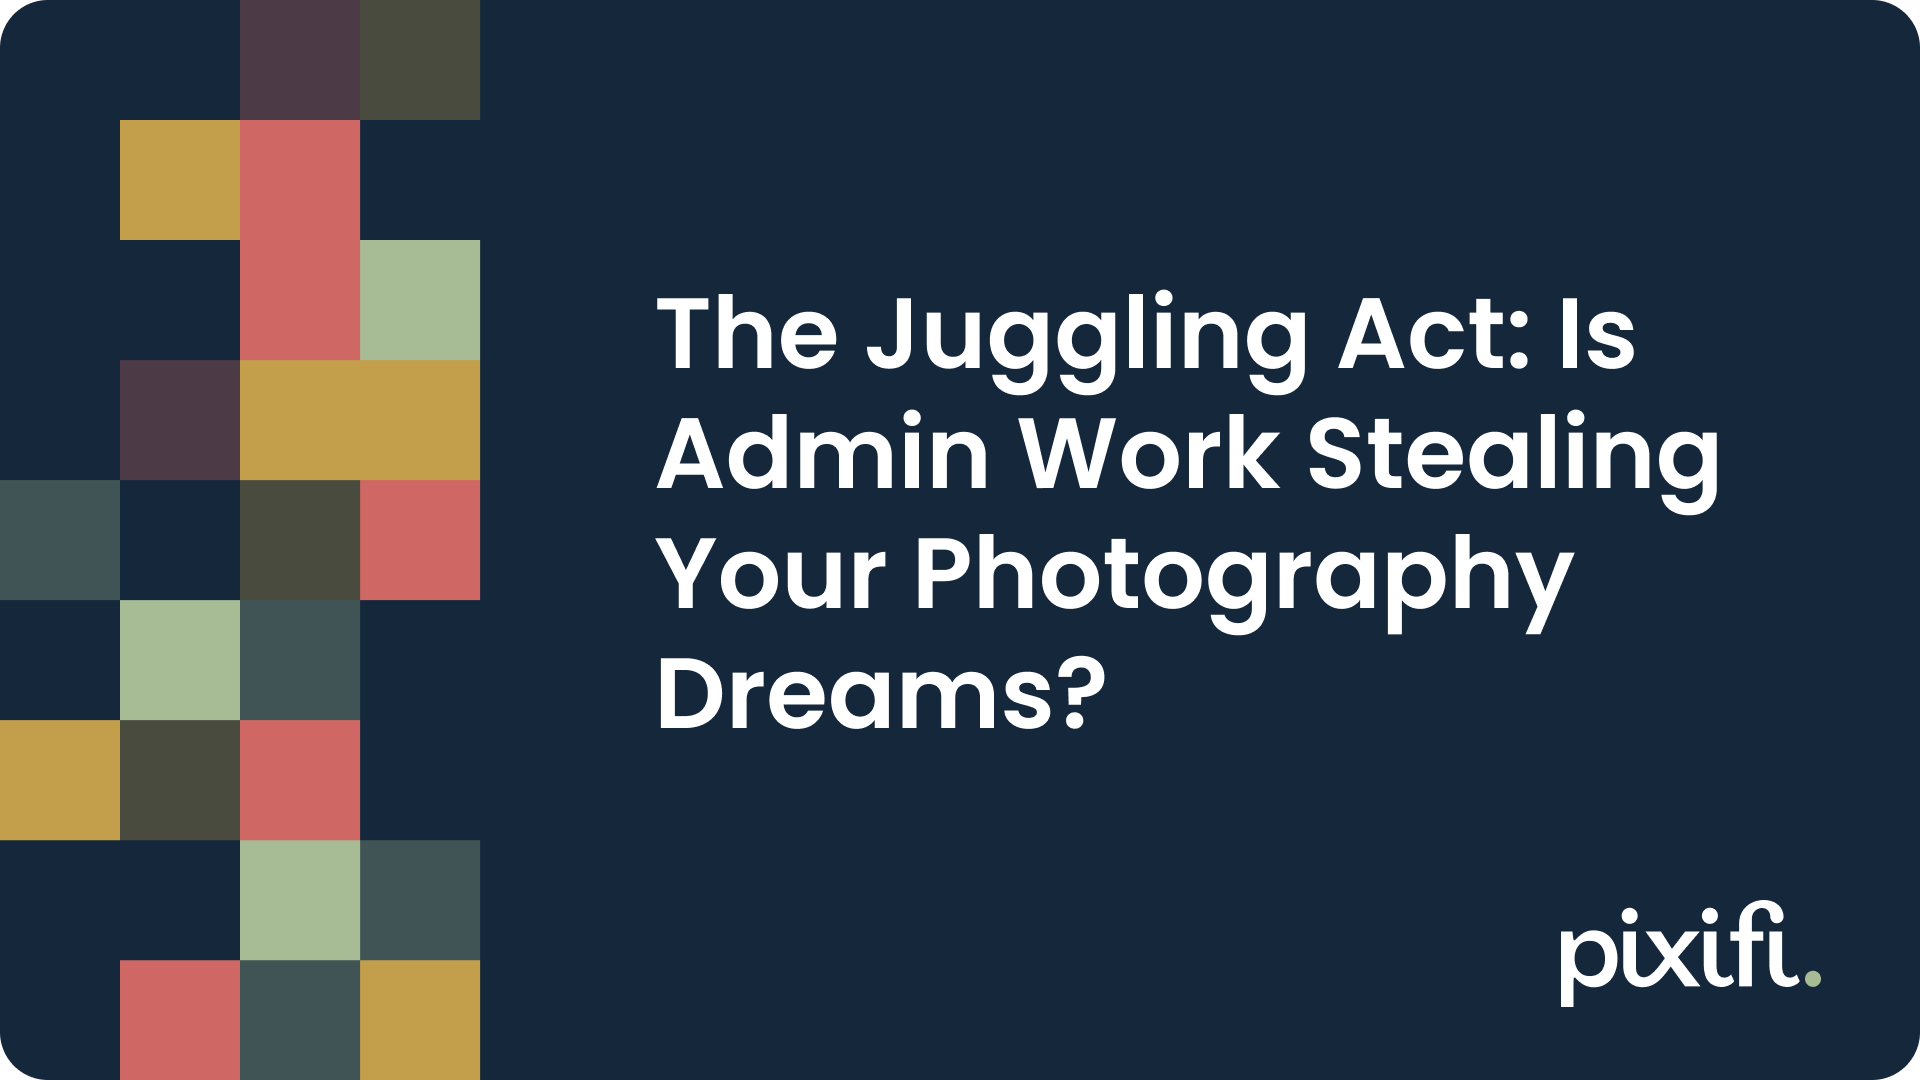 The Juggling Act: Is Admin Work Stealing Your Photography Dreams?